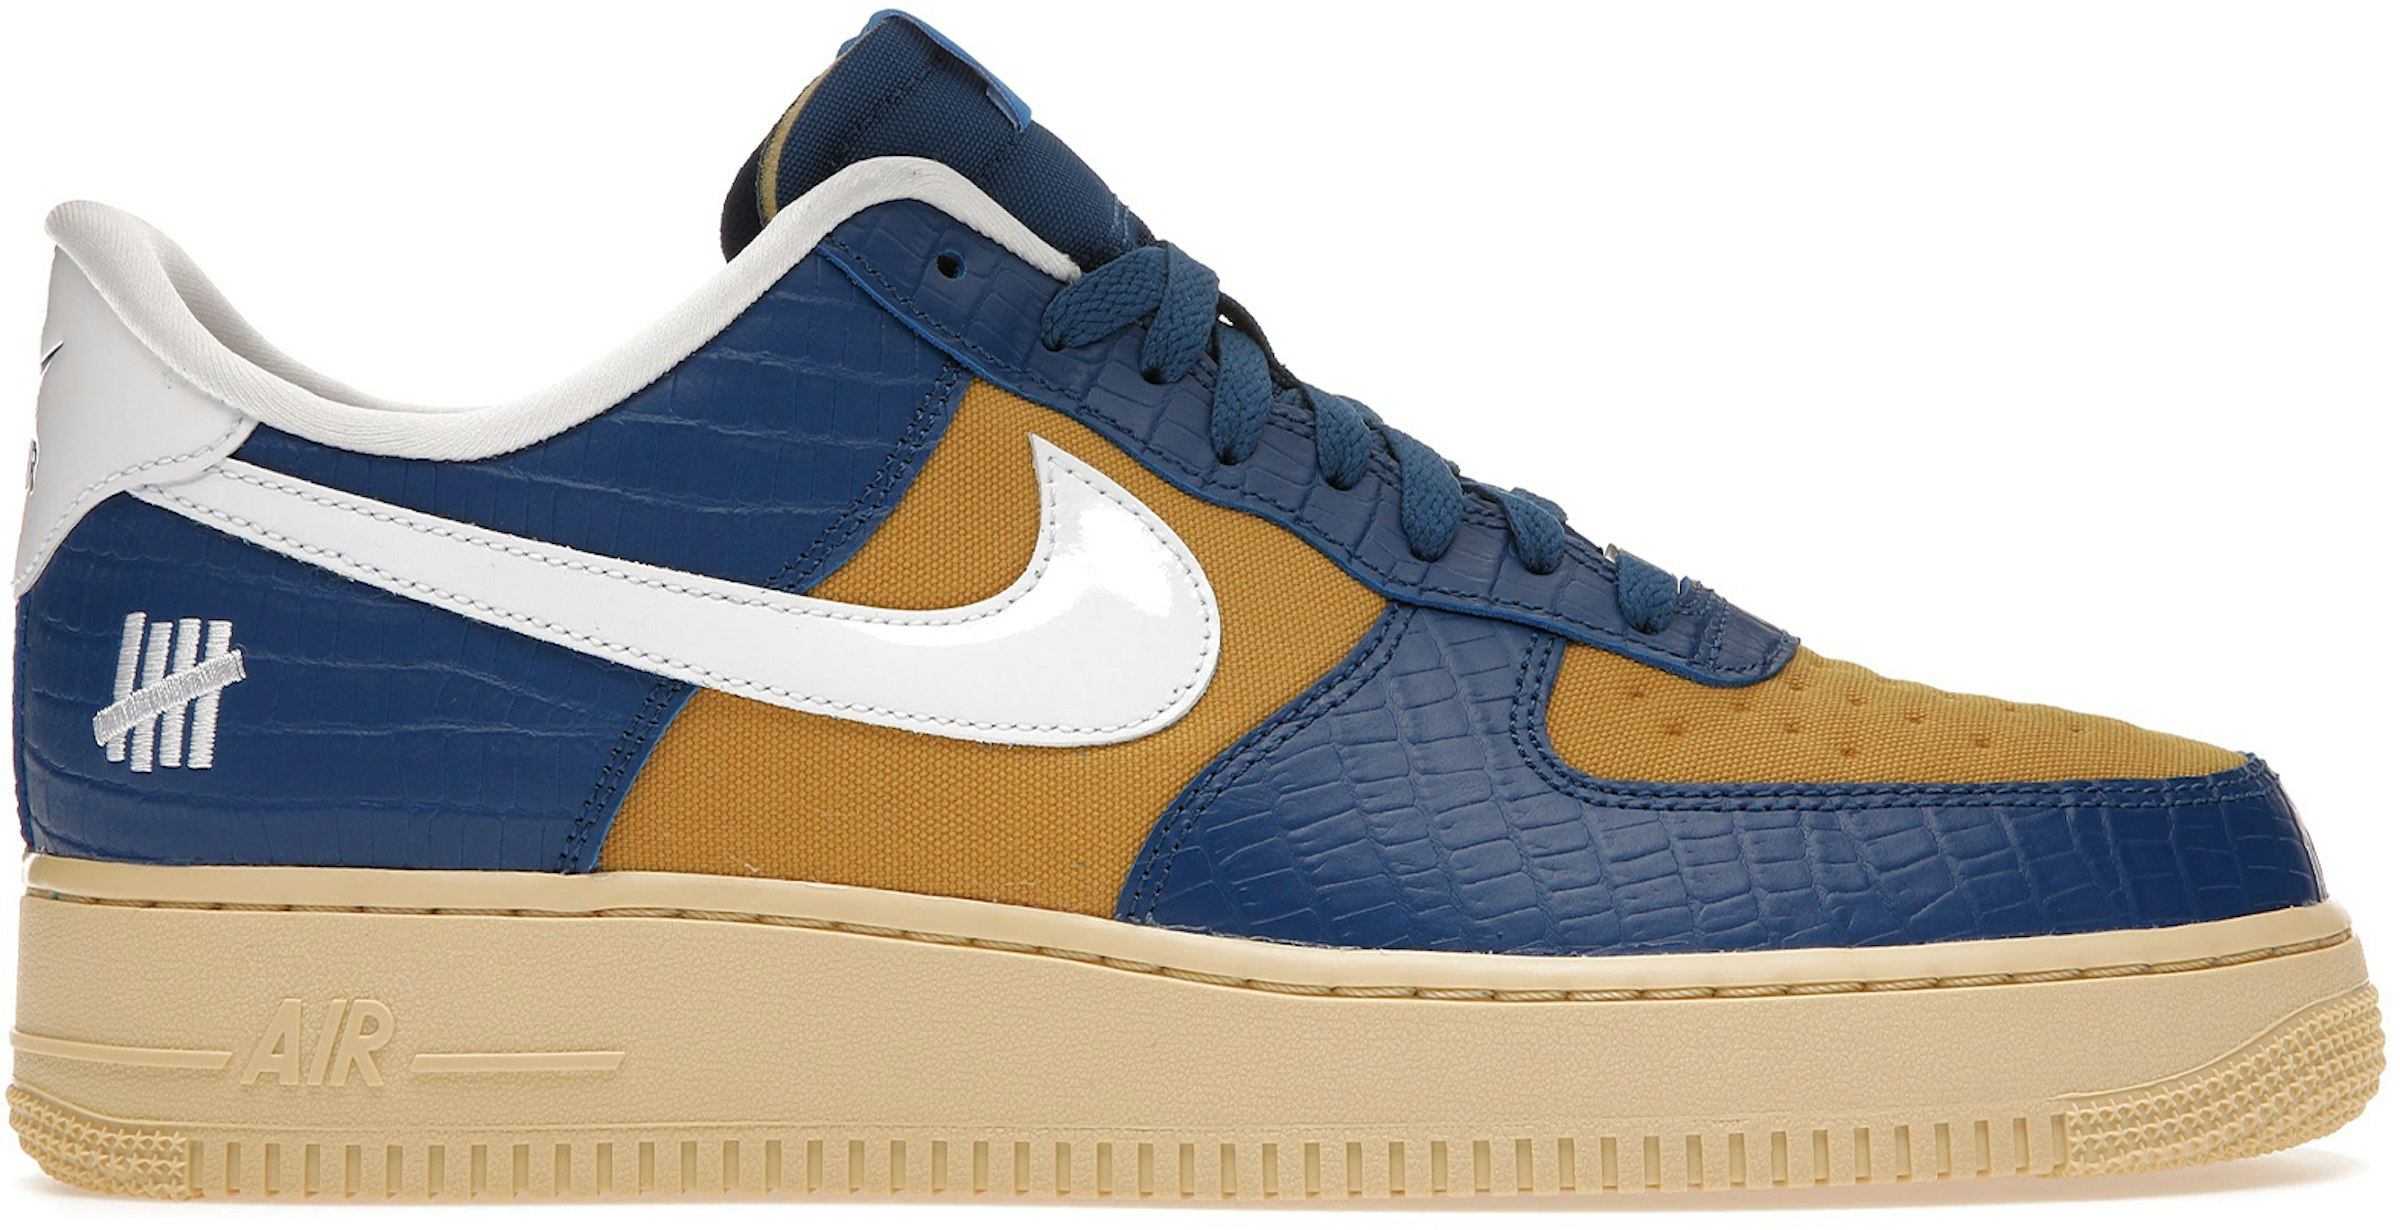 Nike Air Force 1 Low SP Undefeated 5 On It Blue Yellow Croc - DM8462-400 - US